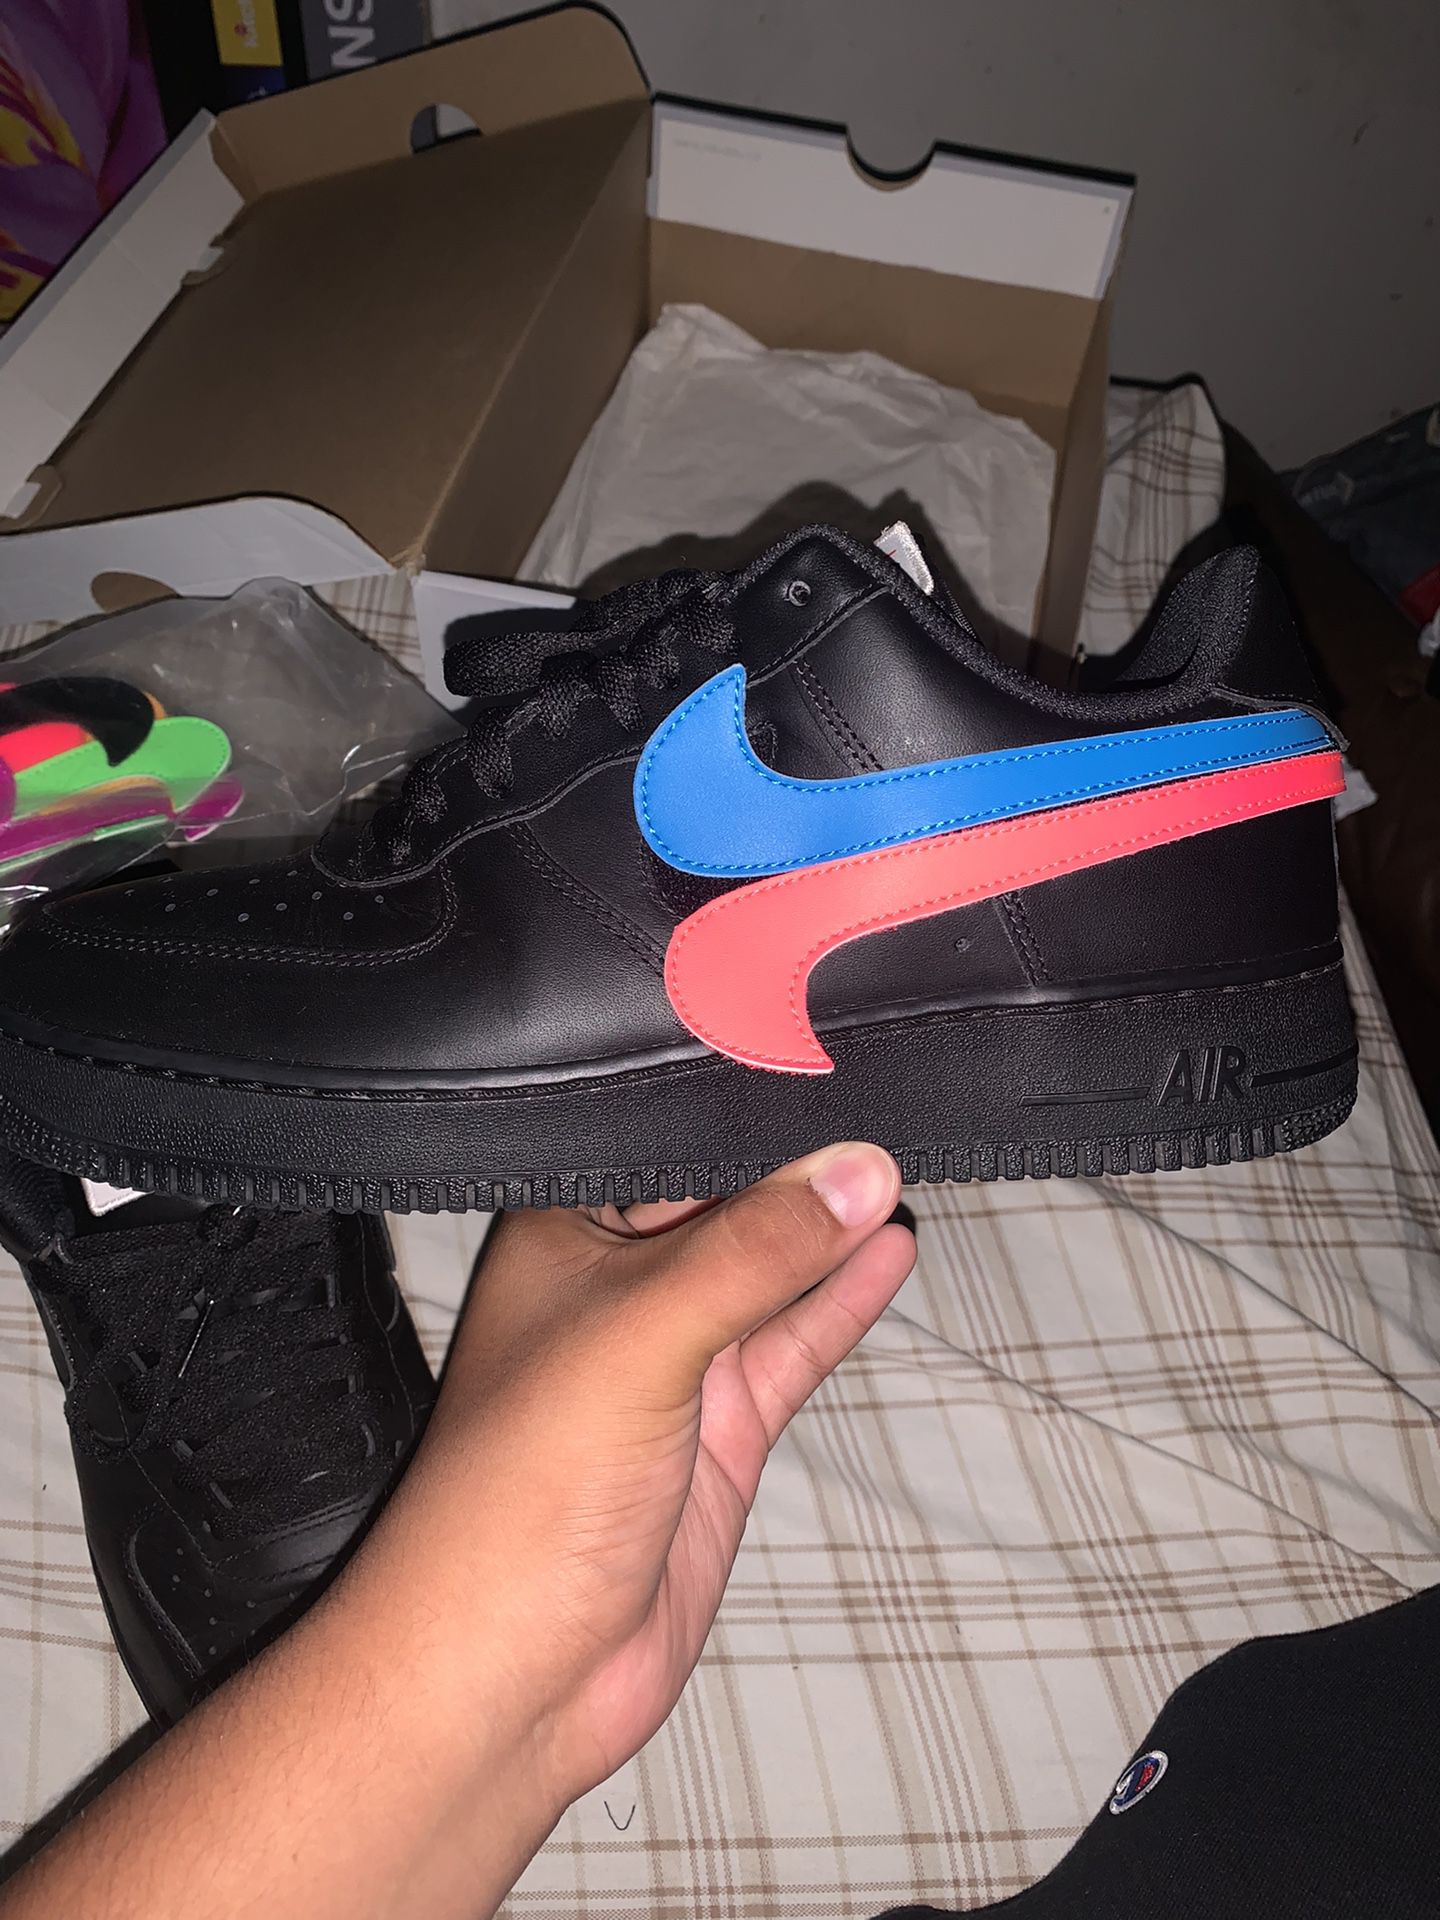 Nike Air force 1 Low All-Star Swoosh Pack - All Black OFFERS ACCEPTED for Sale in West CT - OfferUp